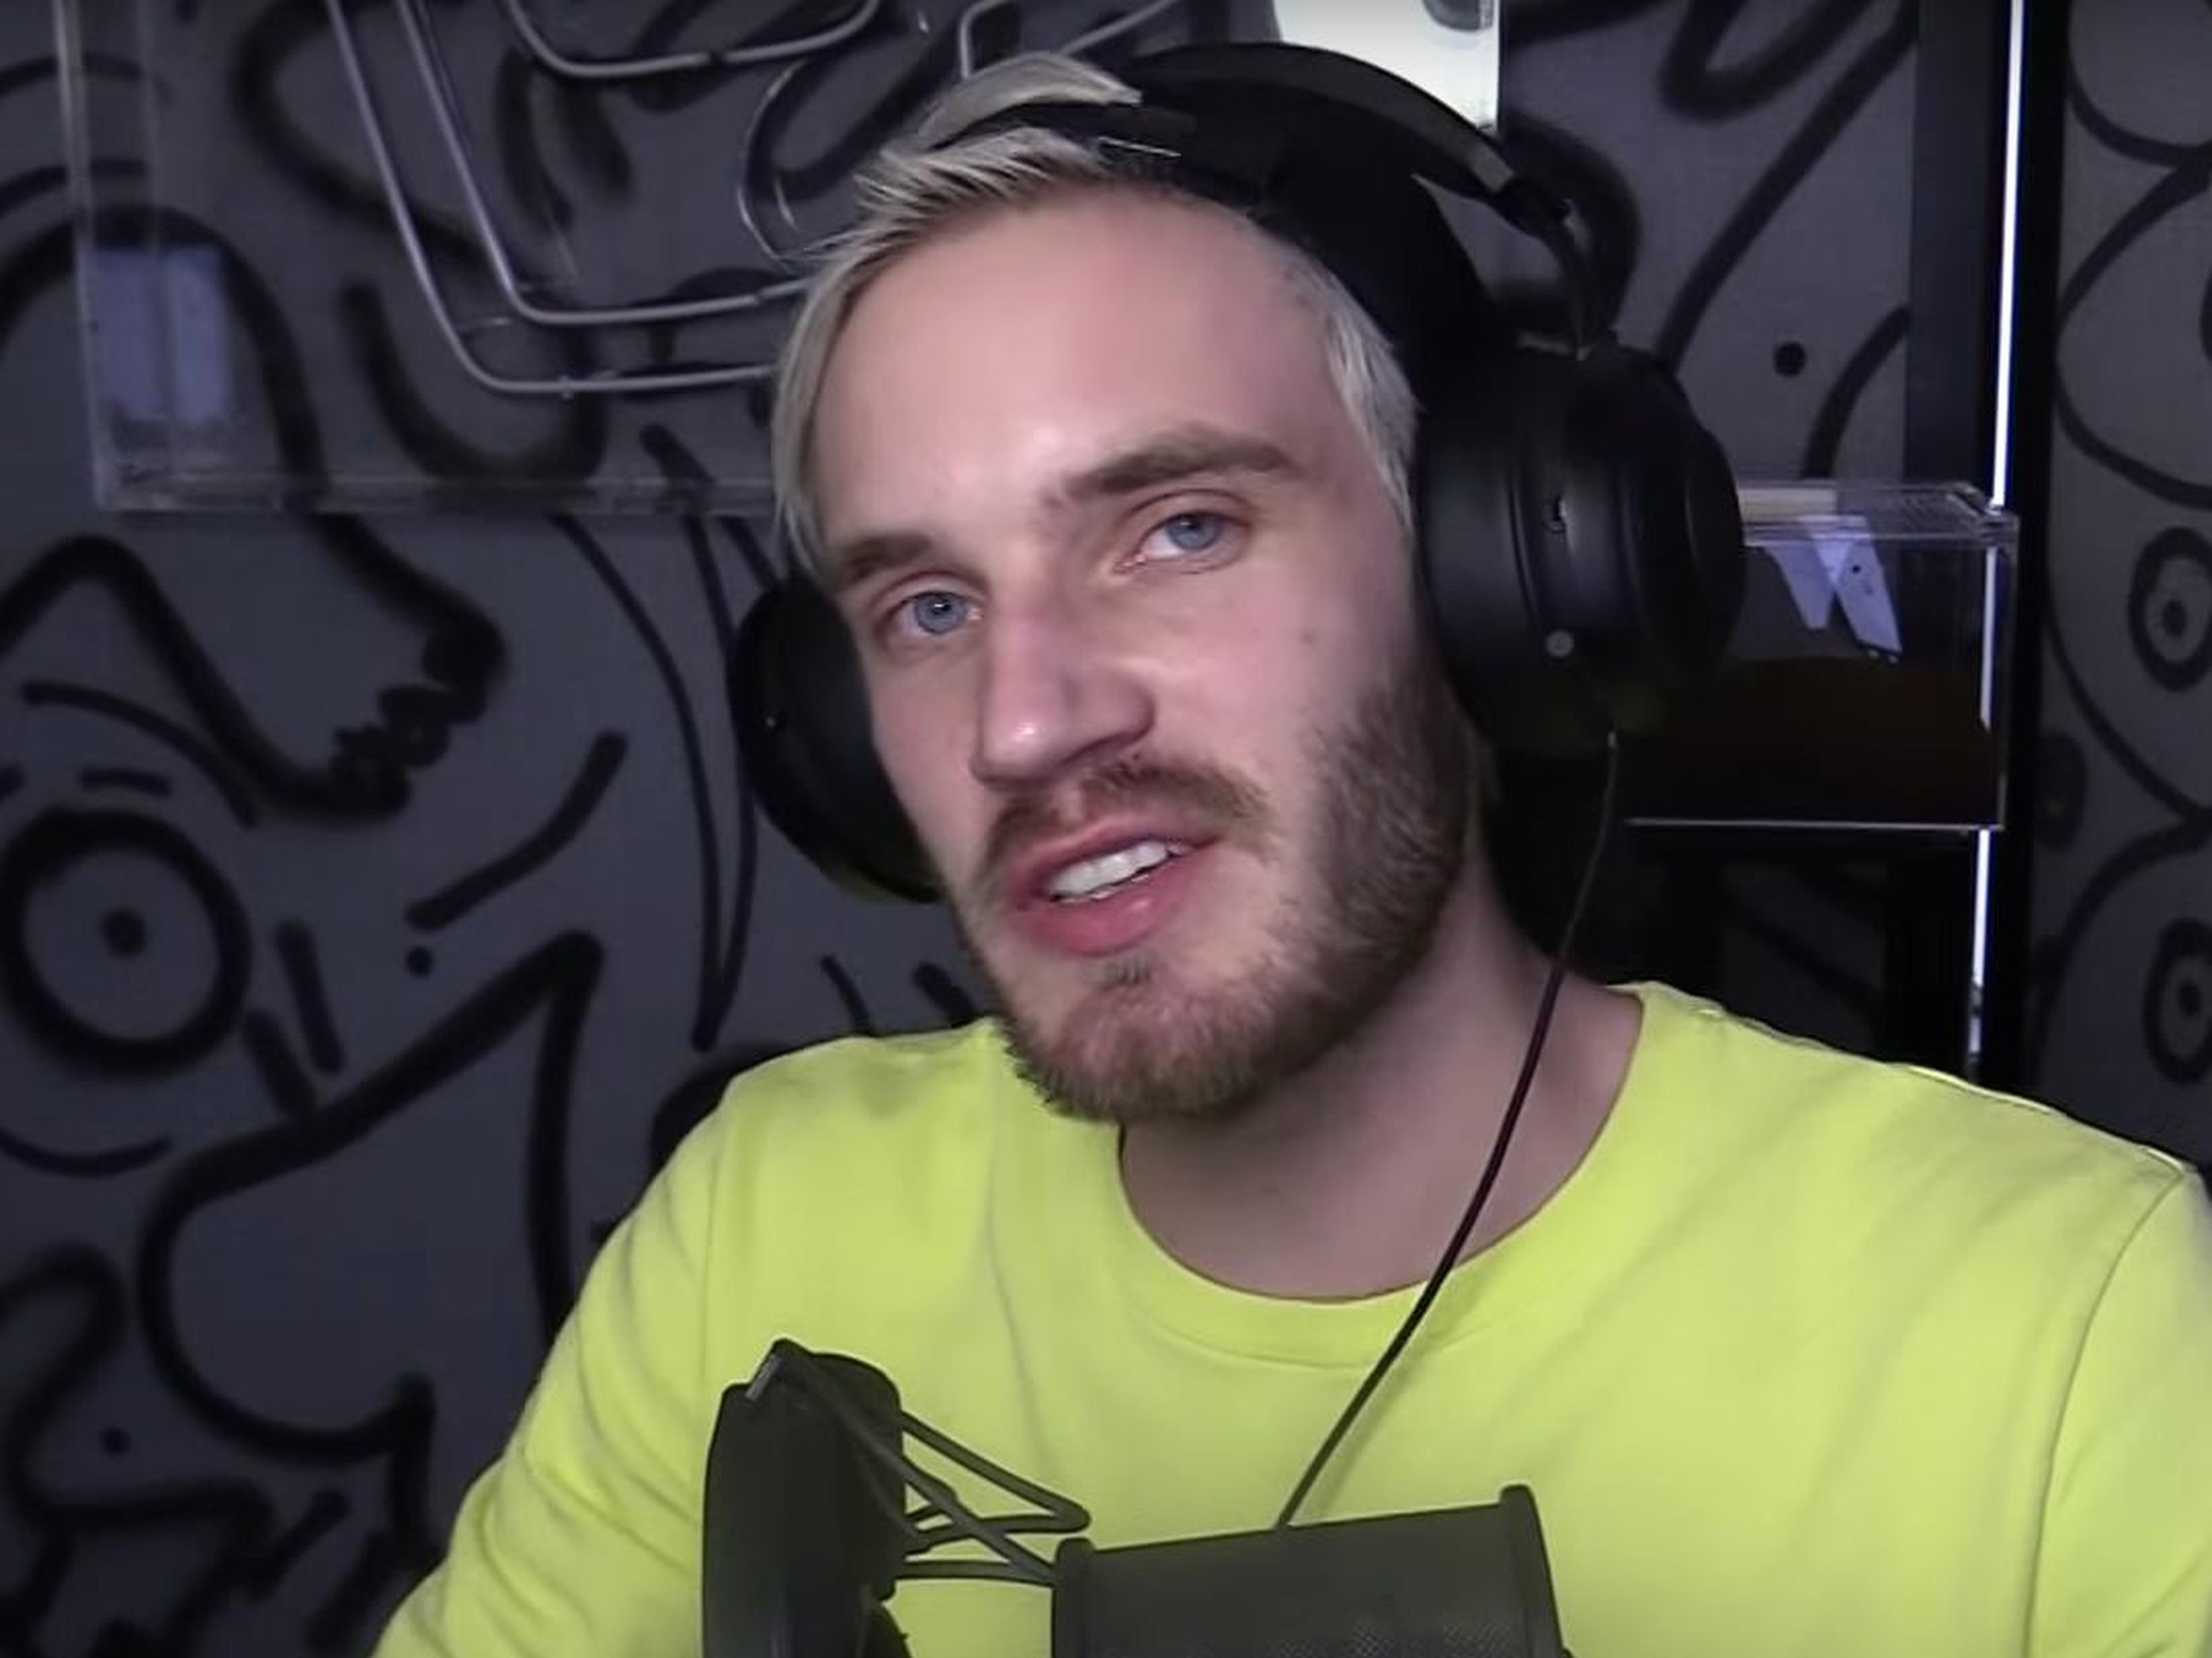 However, Kjellberg was back to making offensive comments in his videos before the end of 2017. While livestreaming himself gaming, he used a racial slur during an expletive-ridden rant. It wasn't the first time he used the N-word